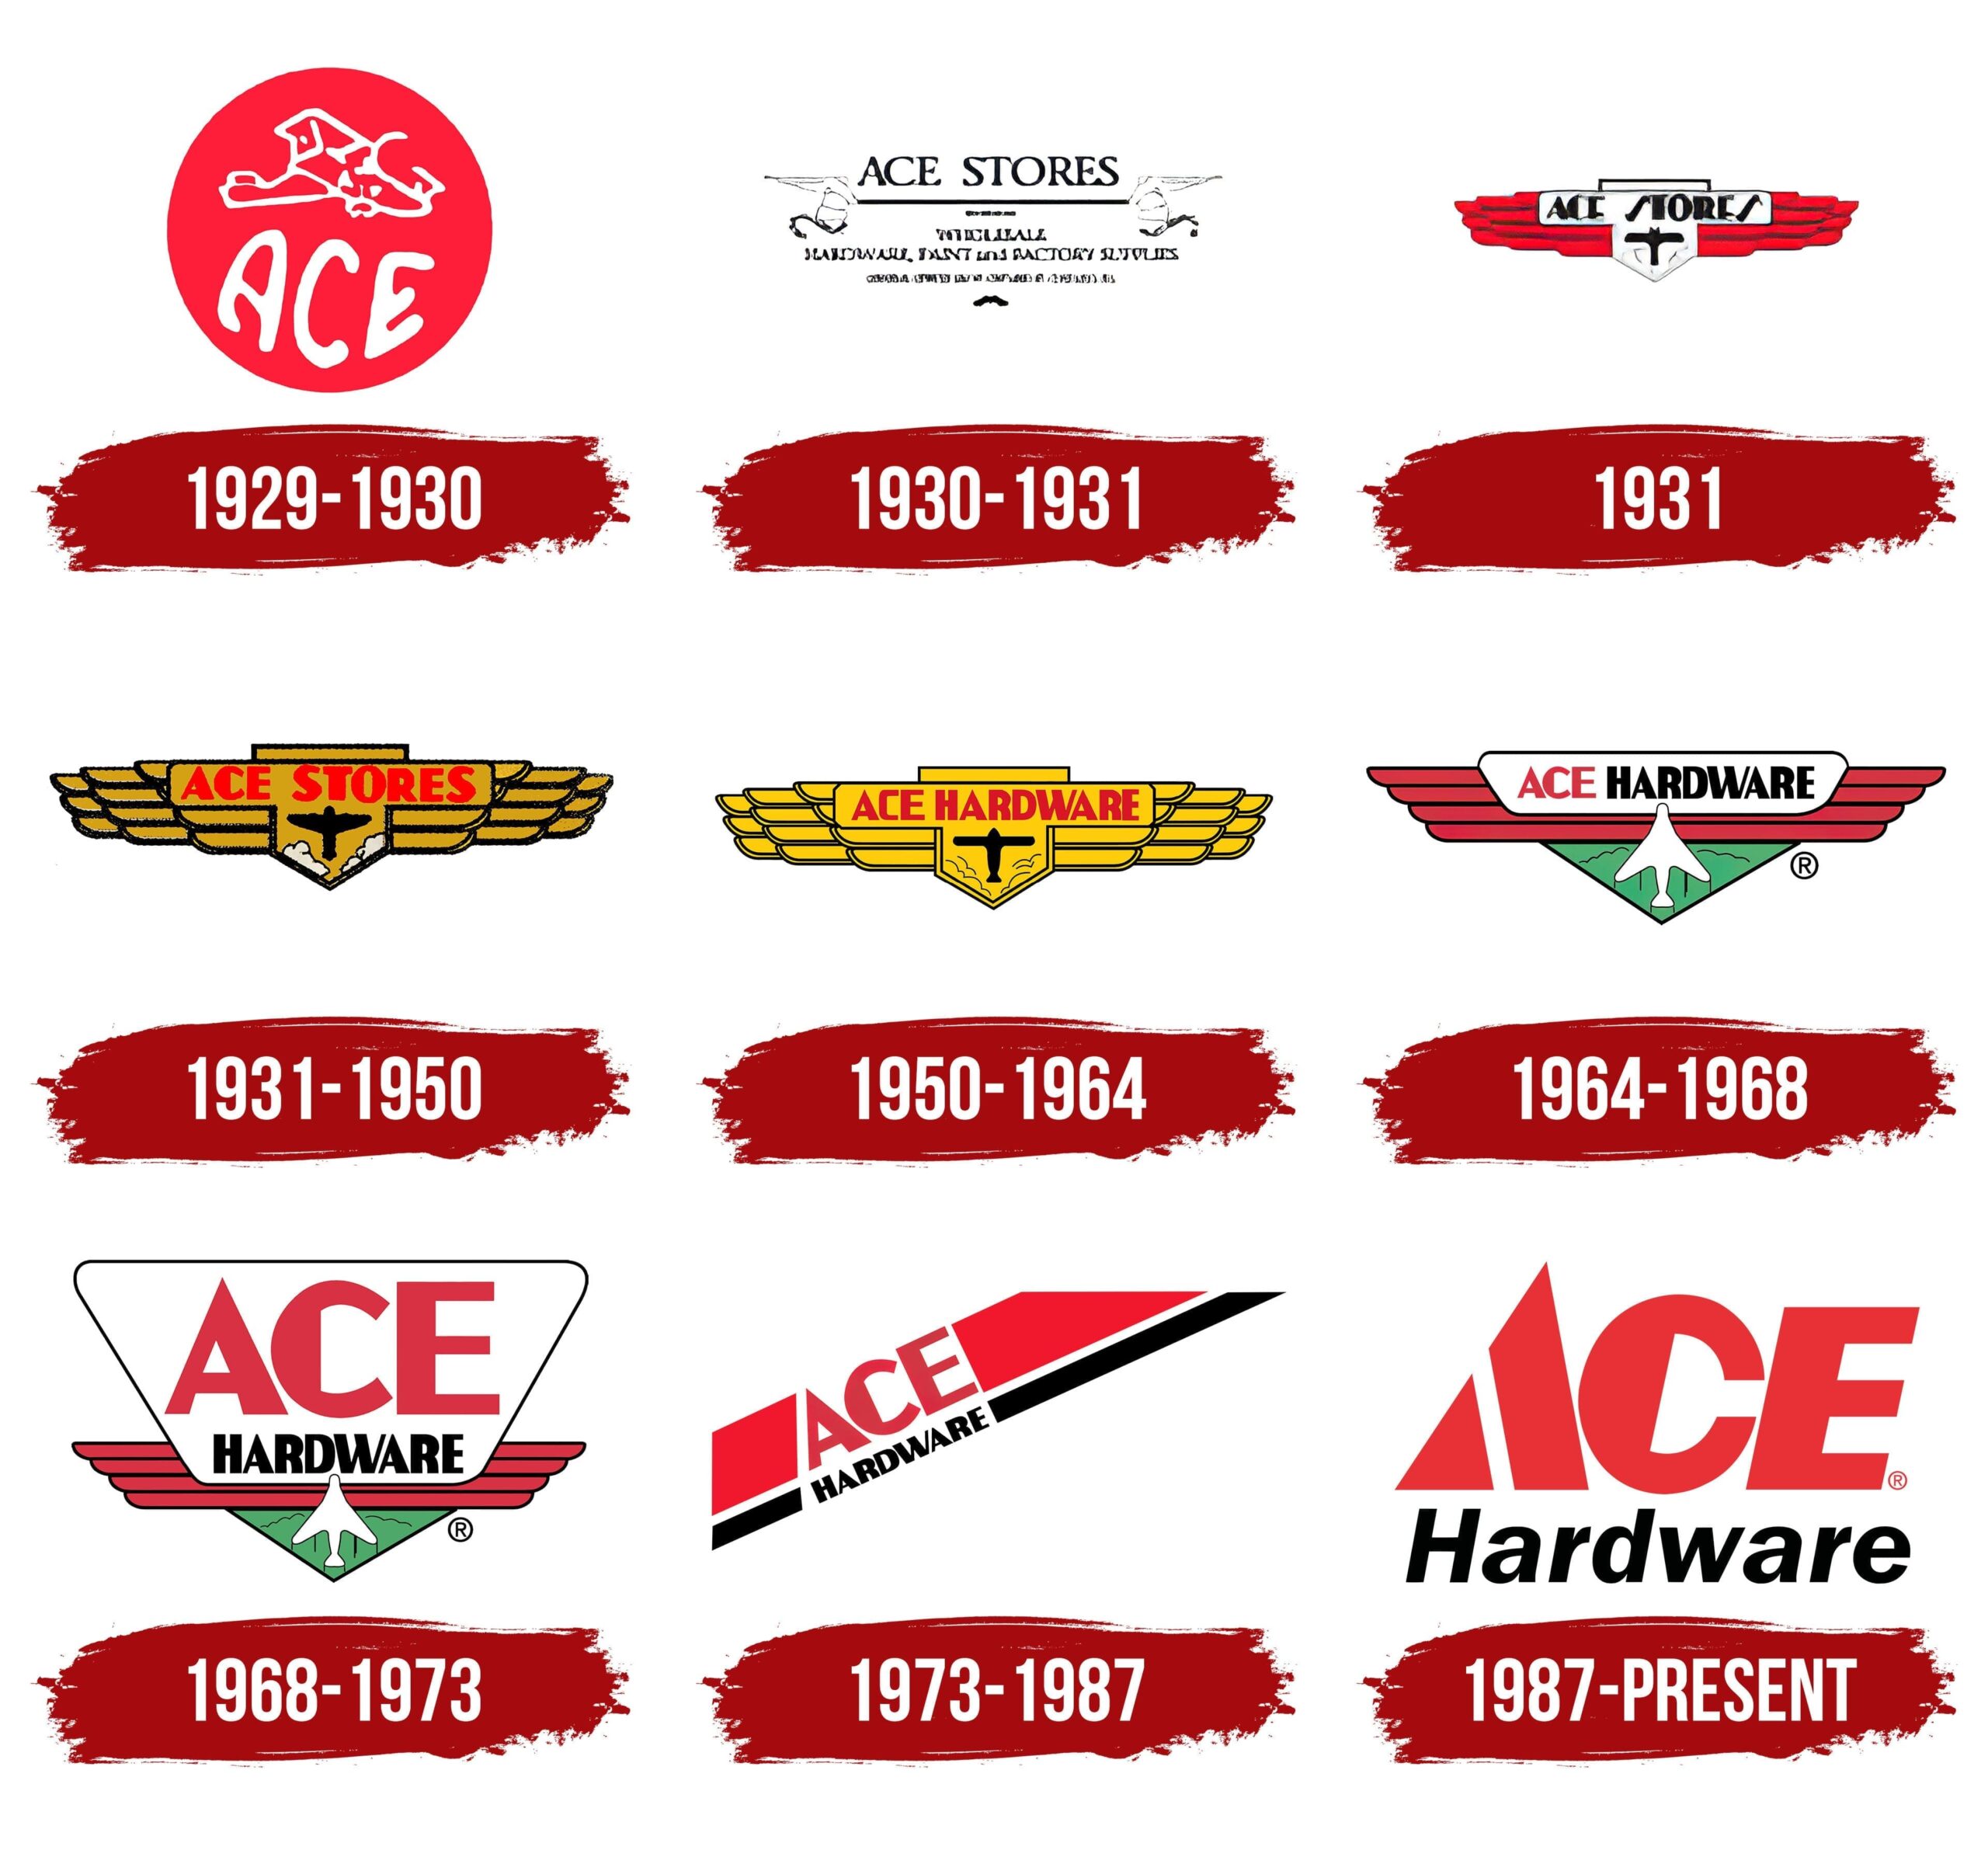 images of the Ace Hardware logo through the years